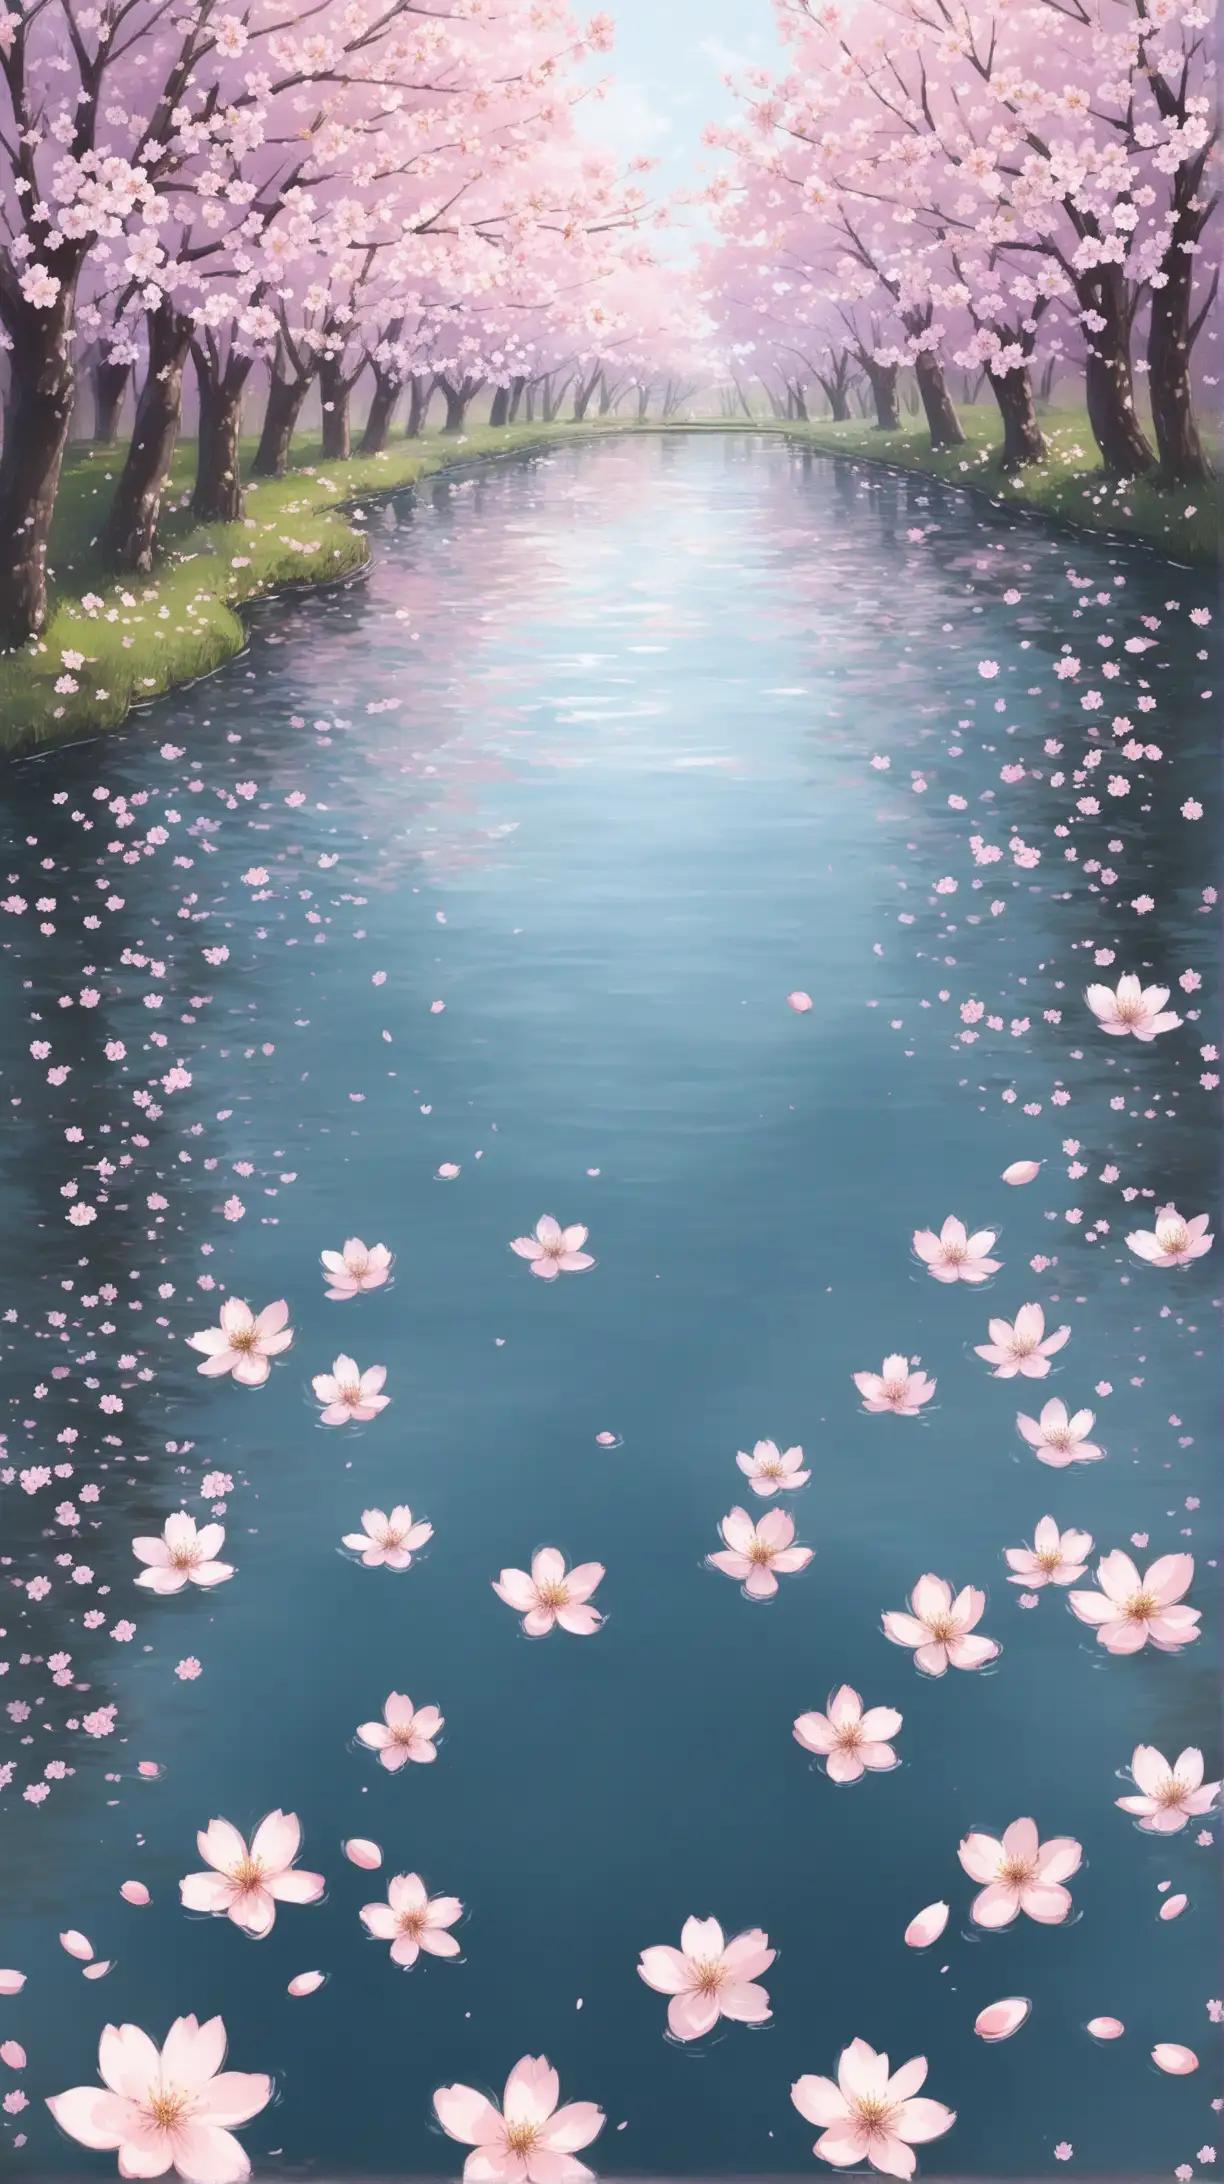 Cherry blossom pedals in pond
